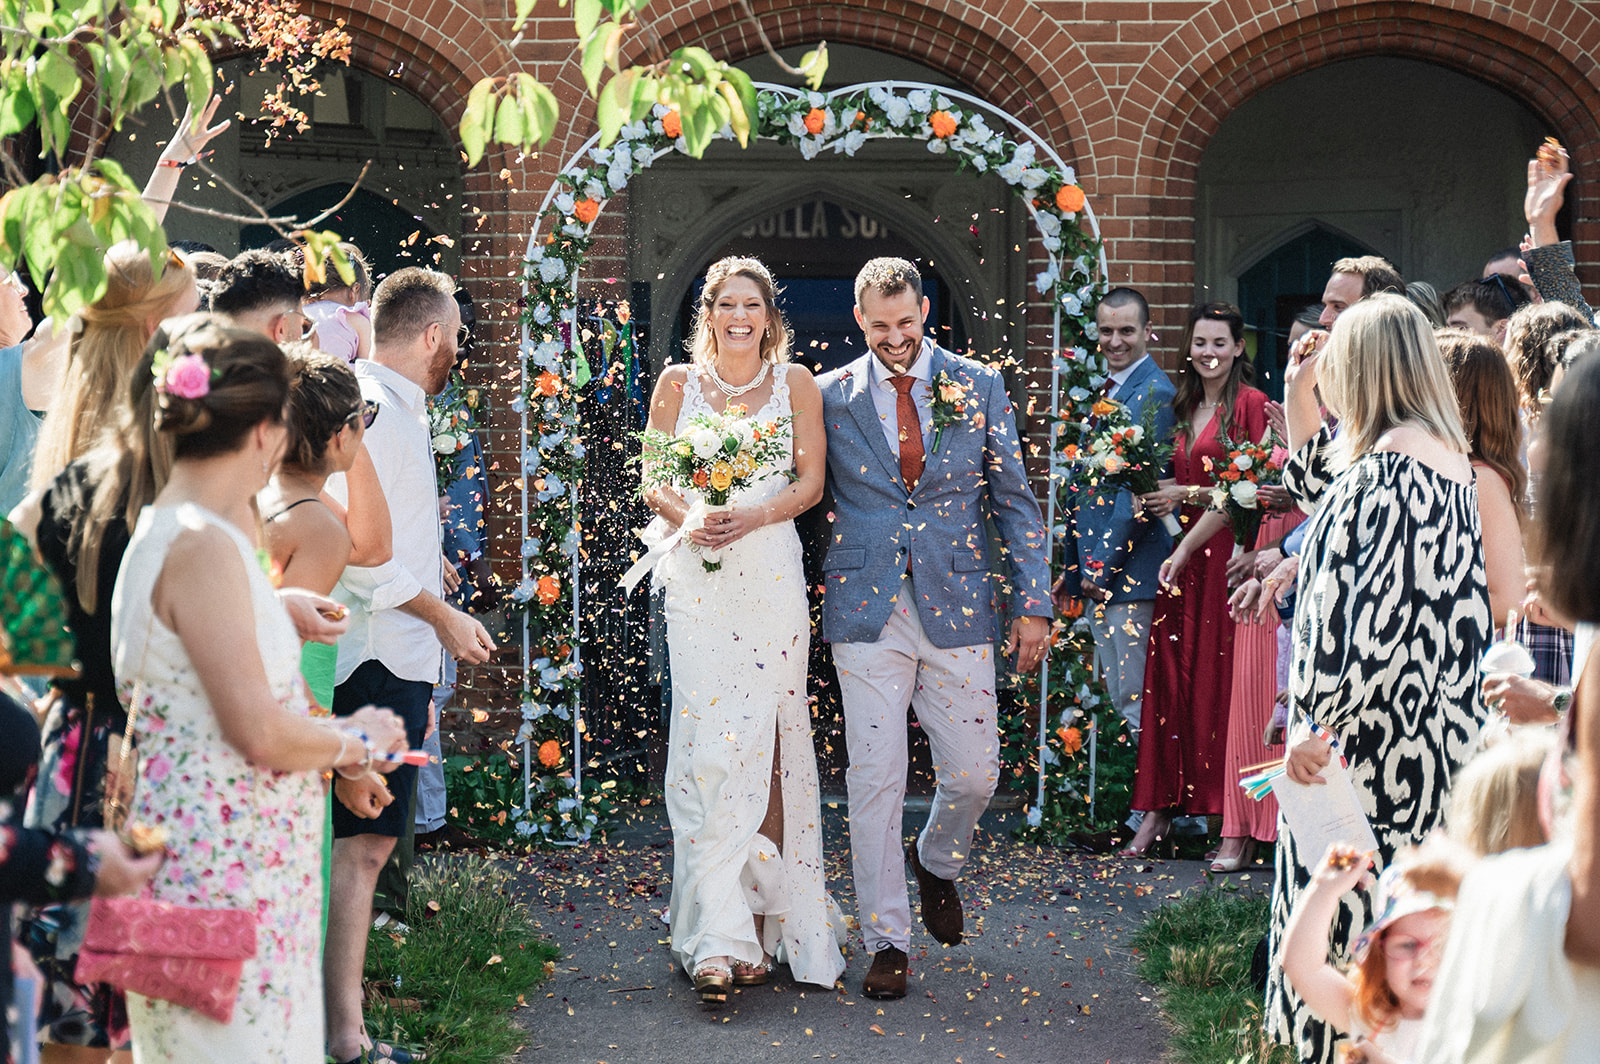 Natalie and George welcomed with confetti toss at Ashburton Hall